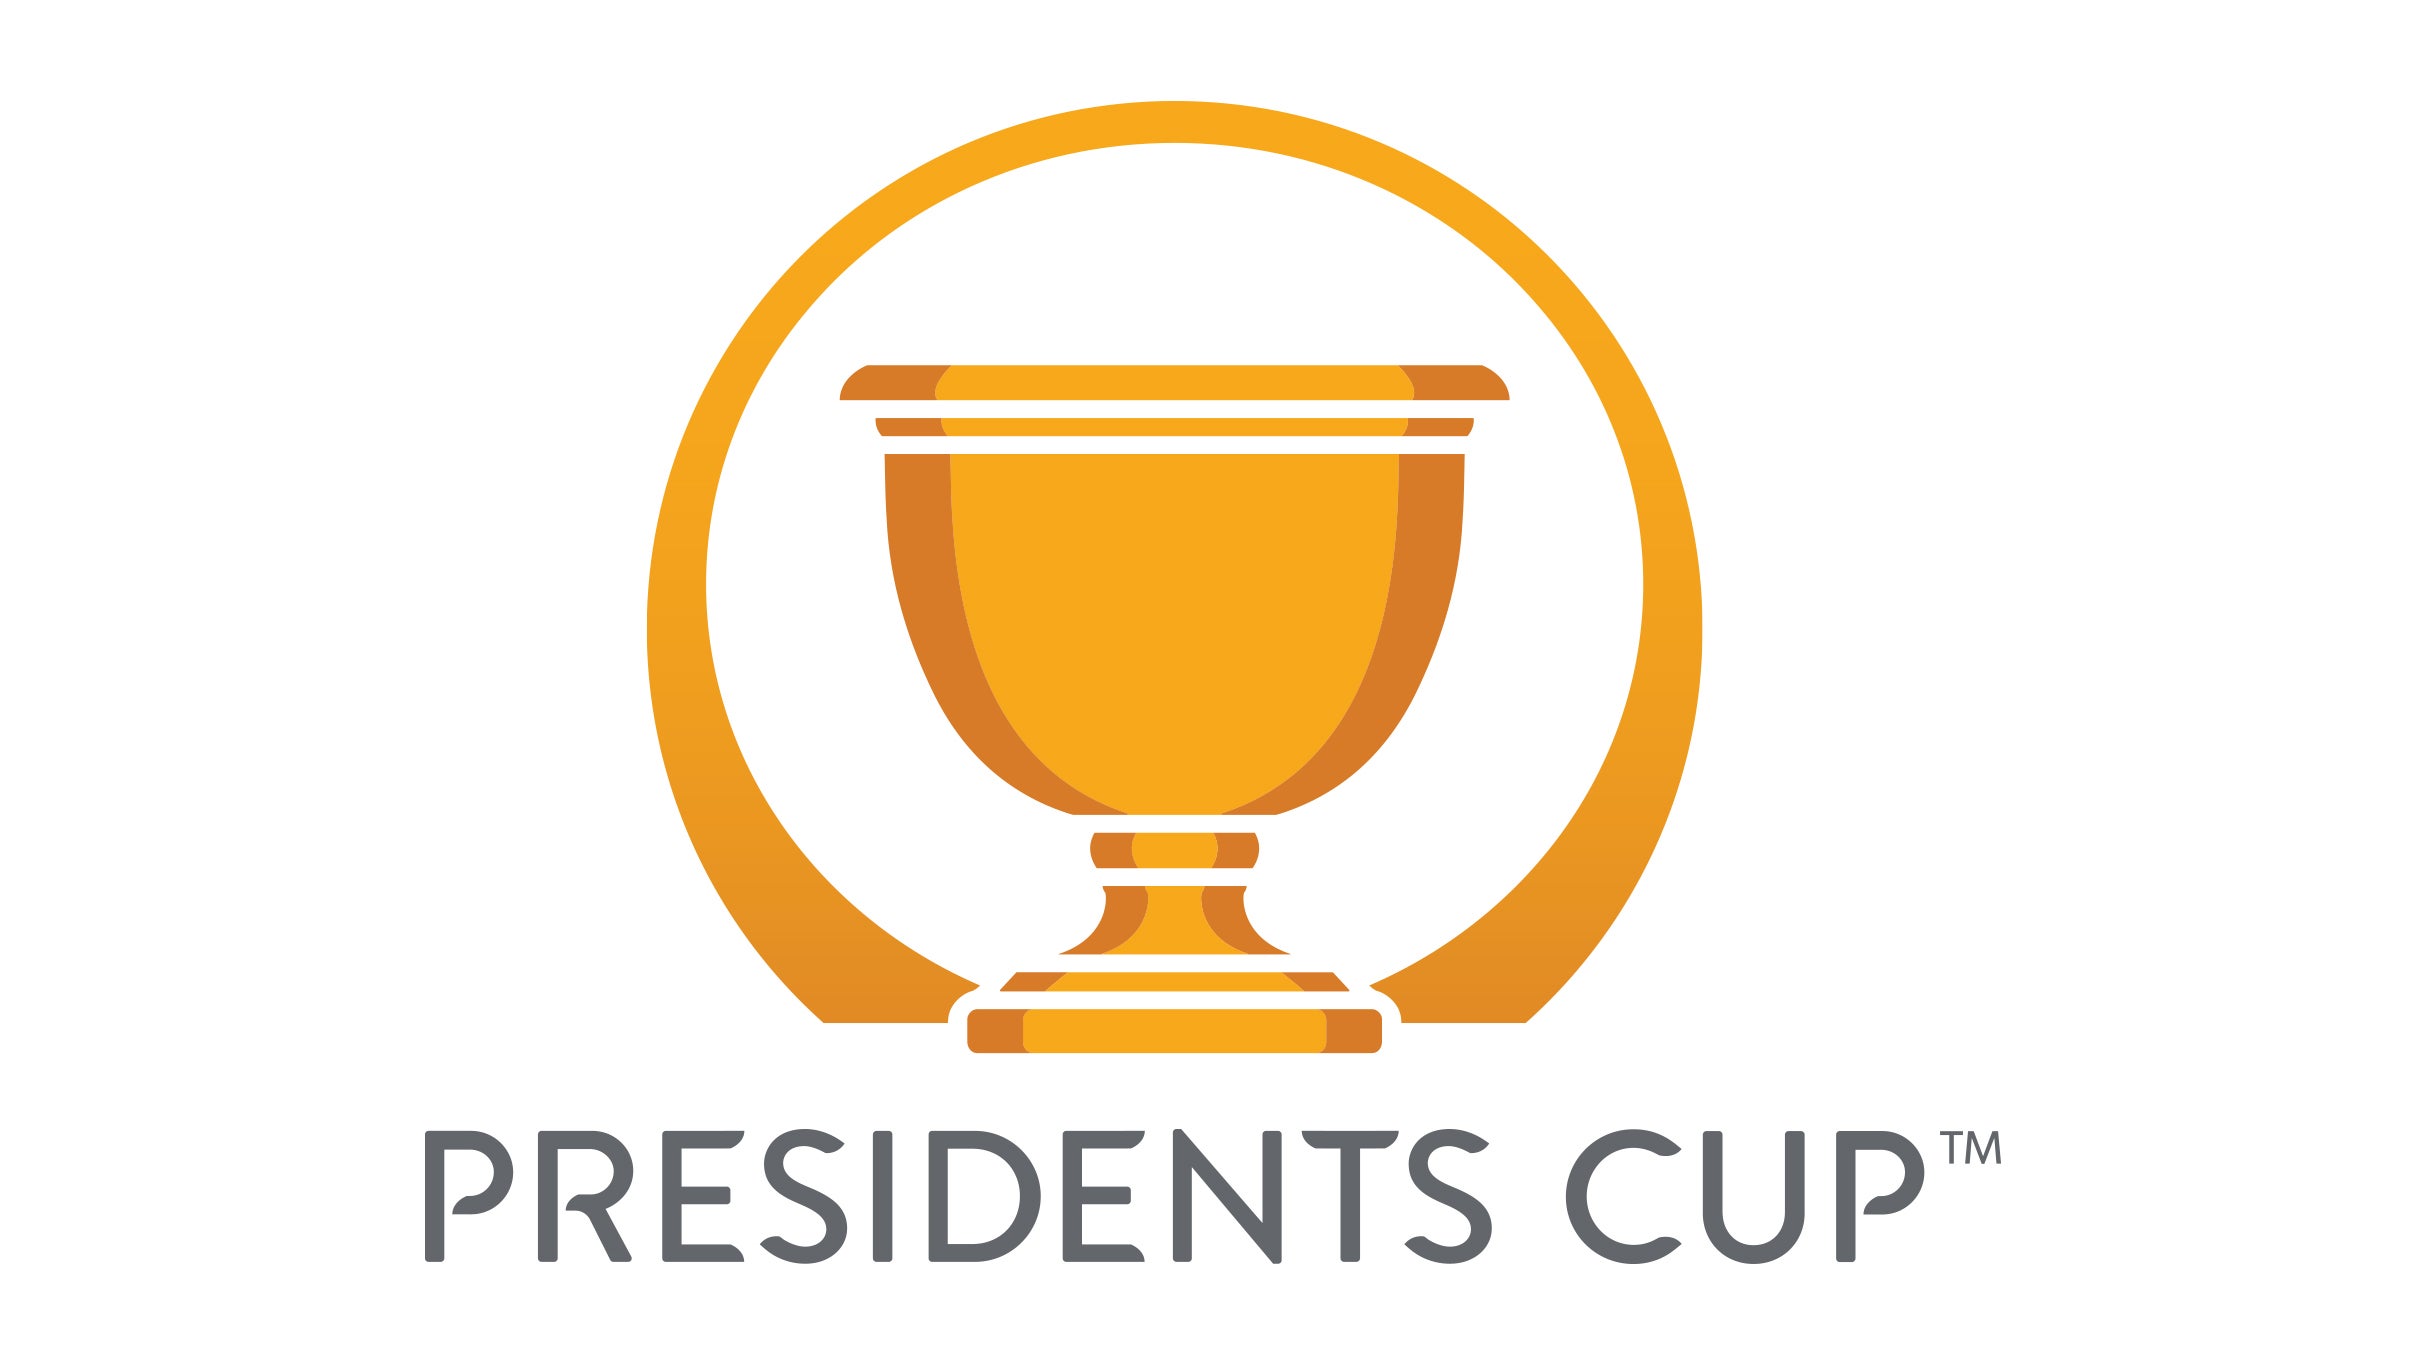 Presidents Cup - Mardi/Tuesday presale passwords